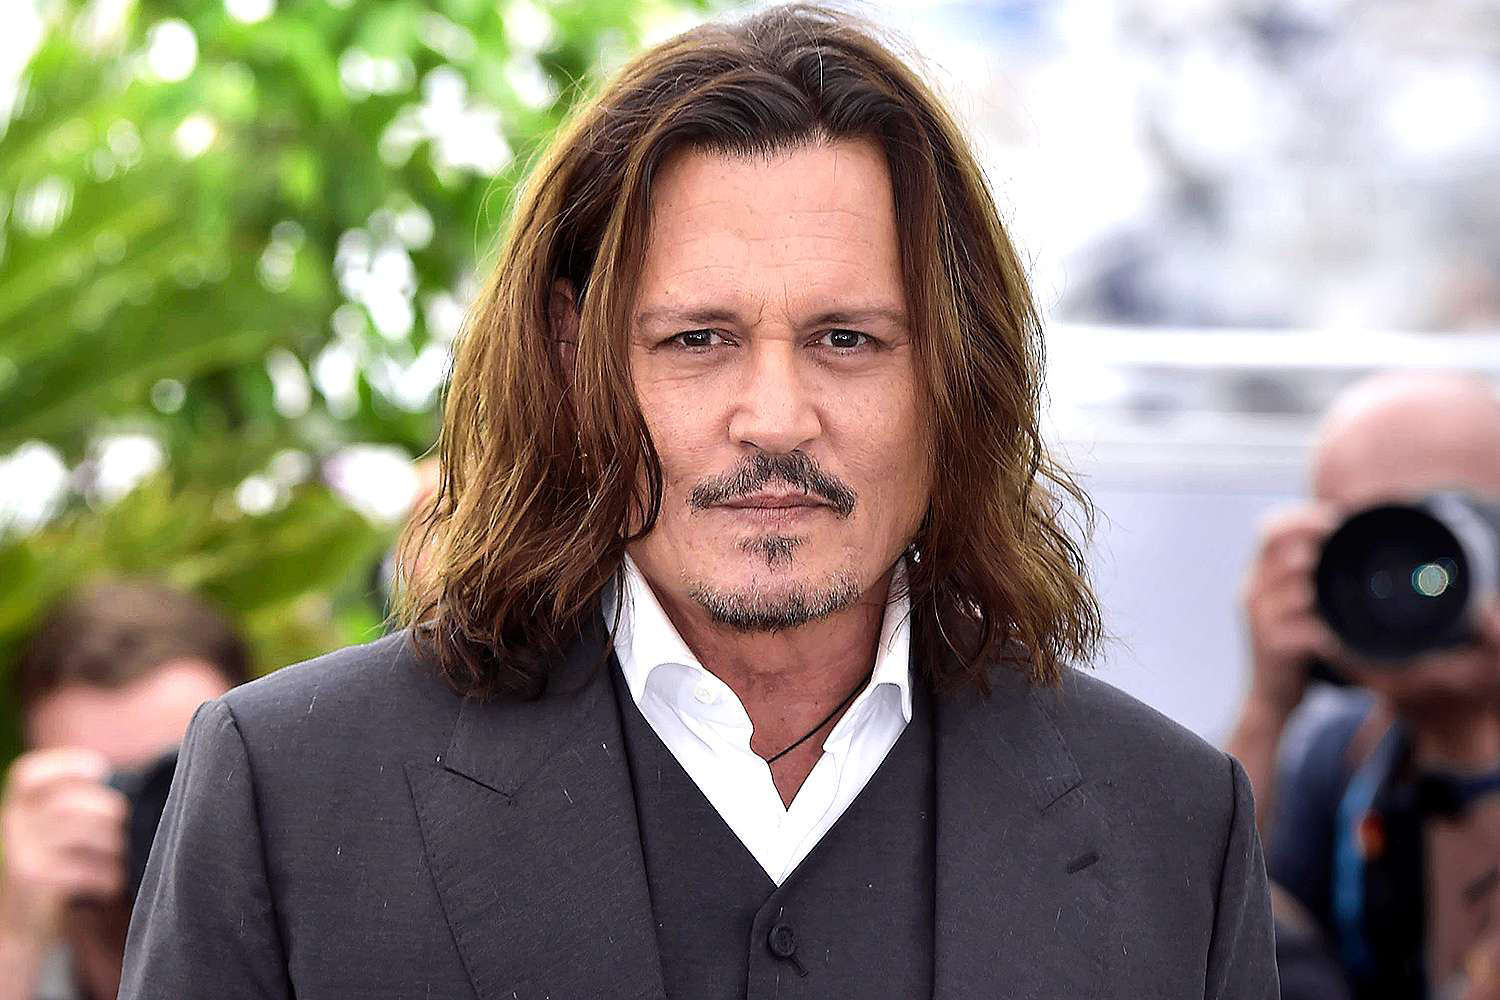 Johnny Depp Shares 'Appreciation' as He Wraps Filming Independent Movie ...